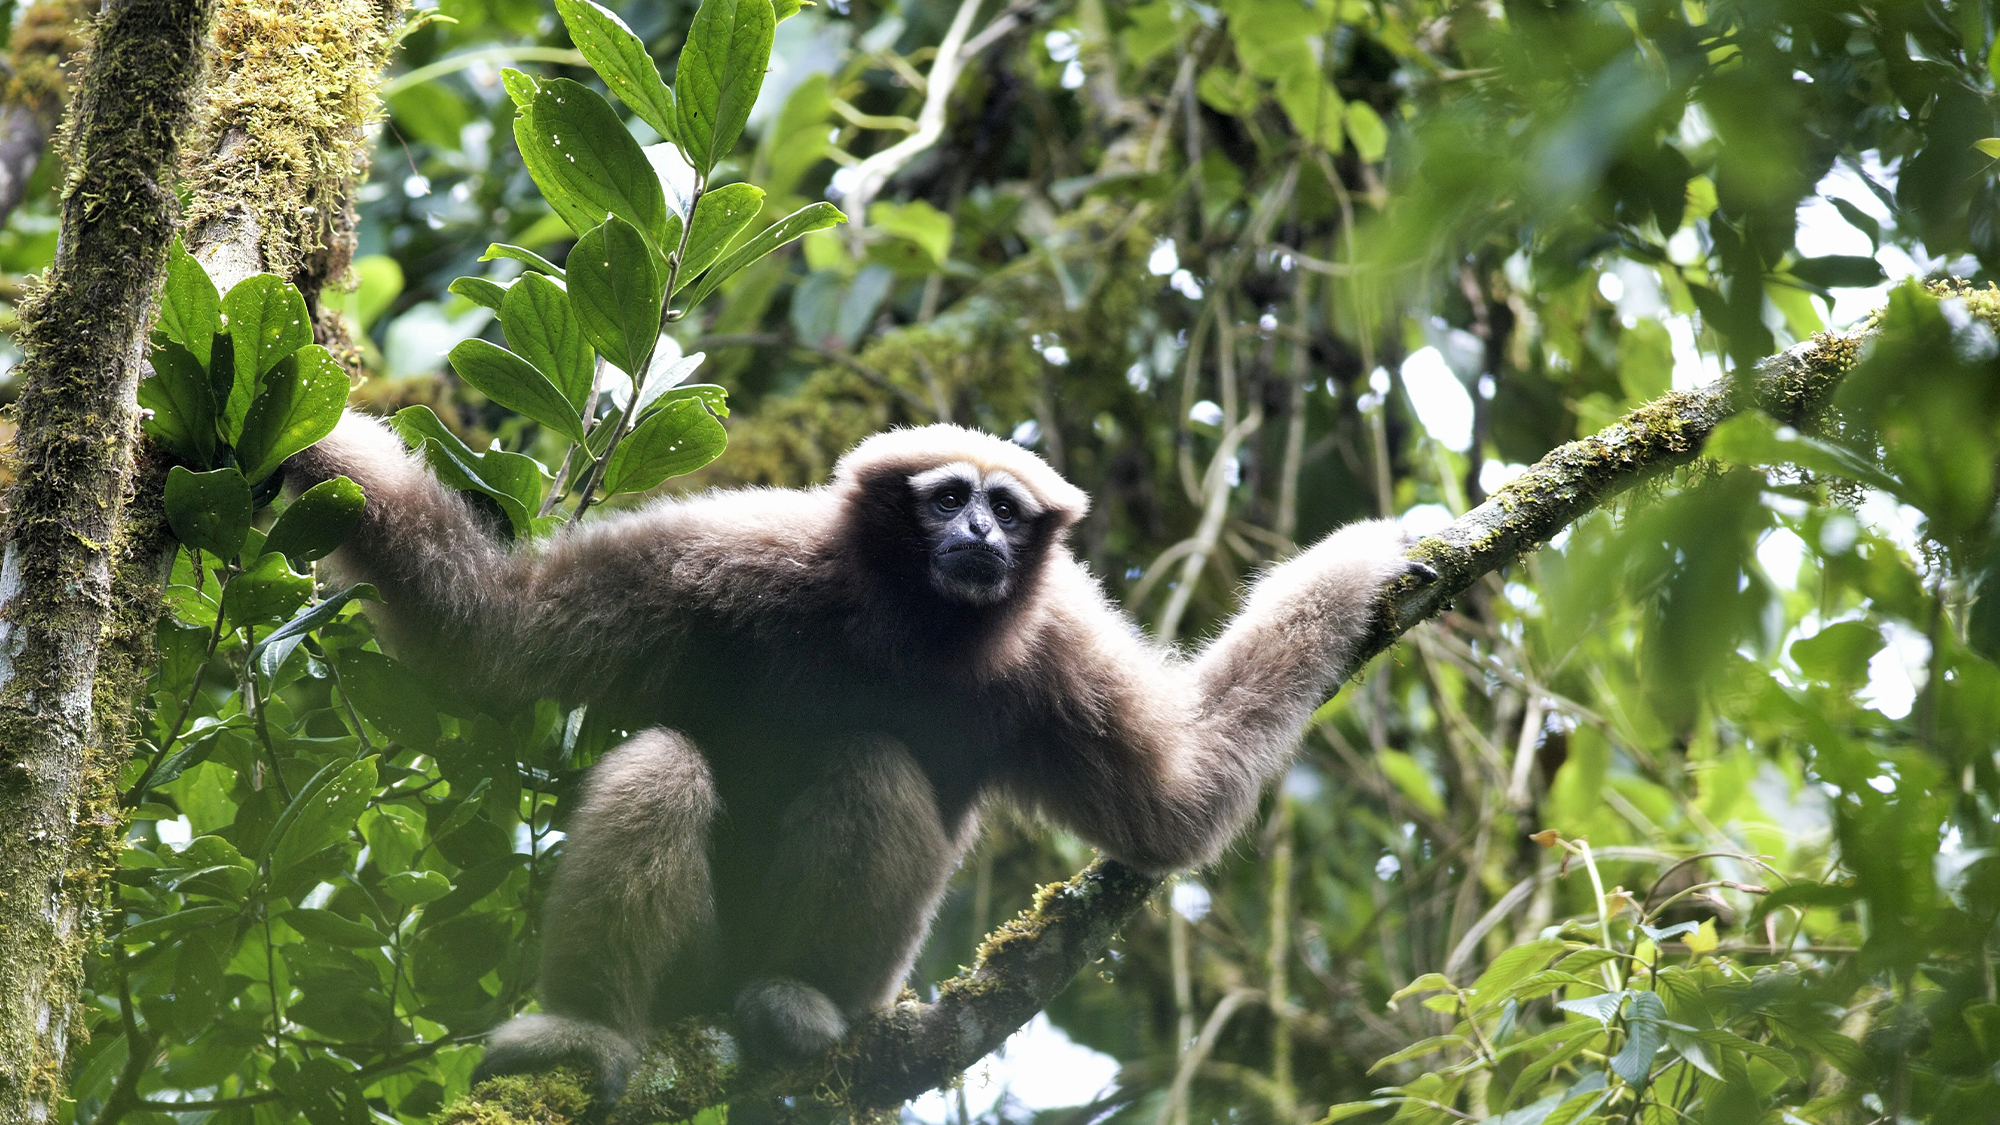 Scientists tracked the love songs of Skywalker gibbons to find them